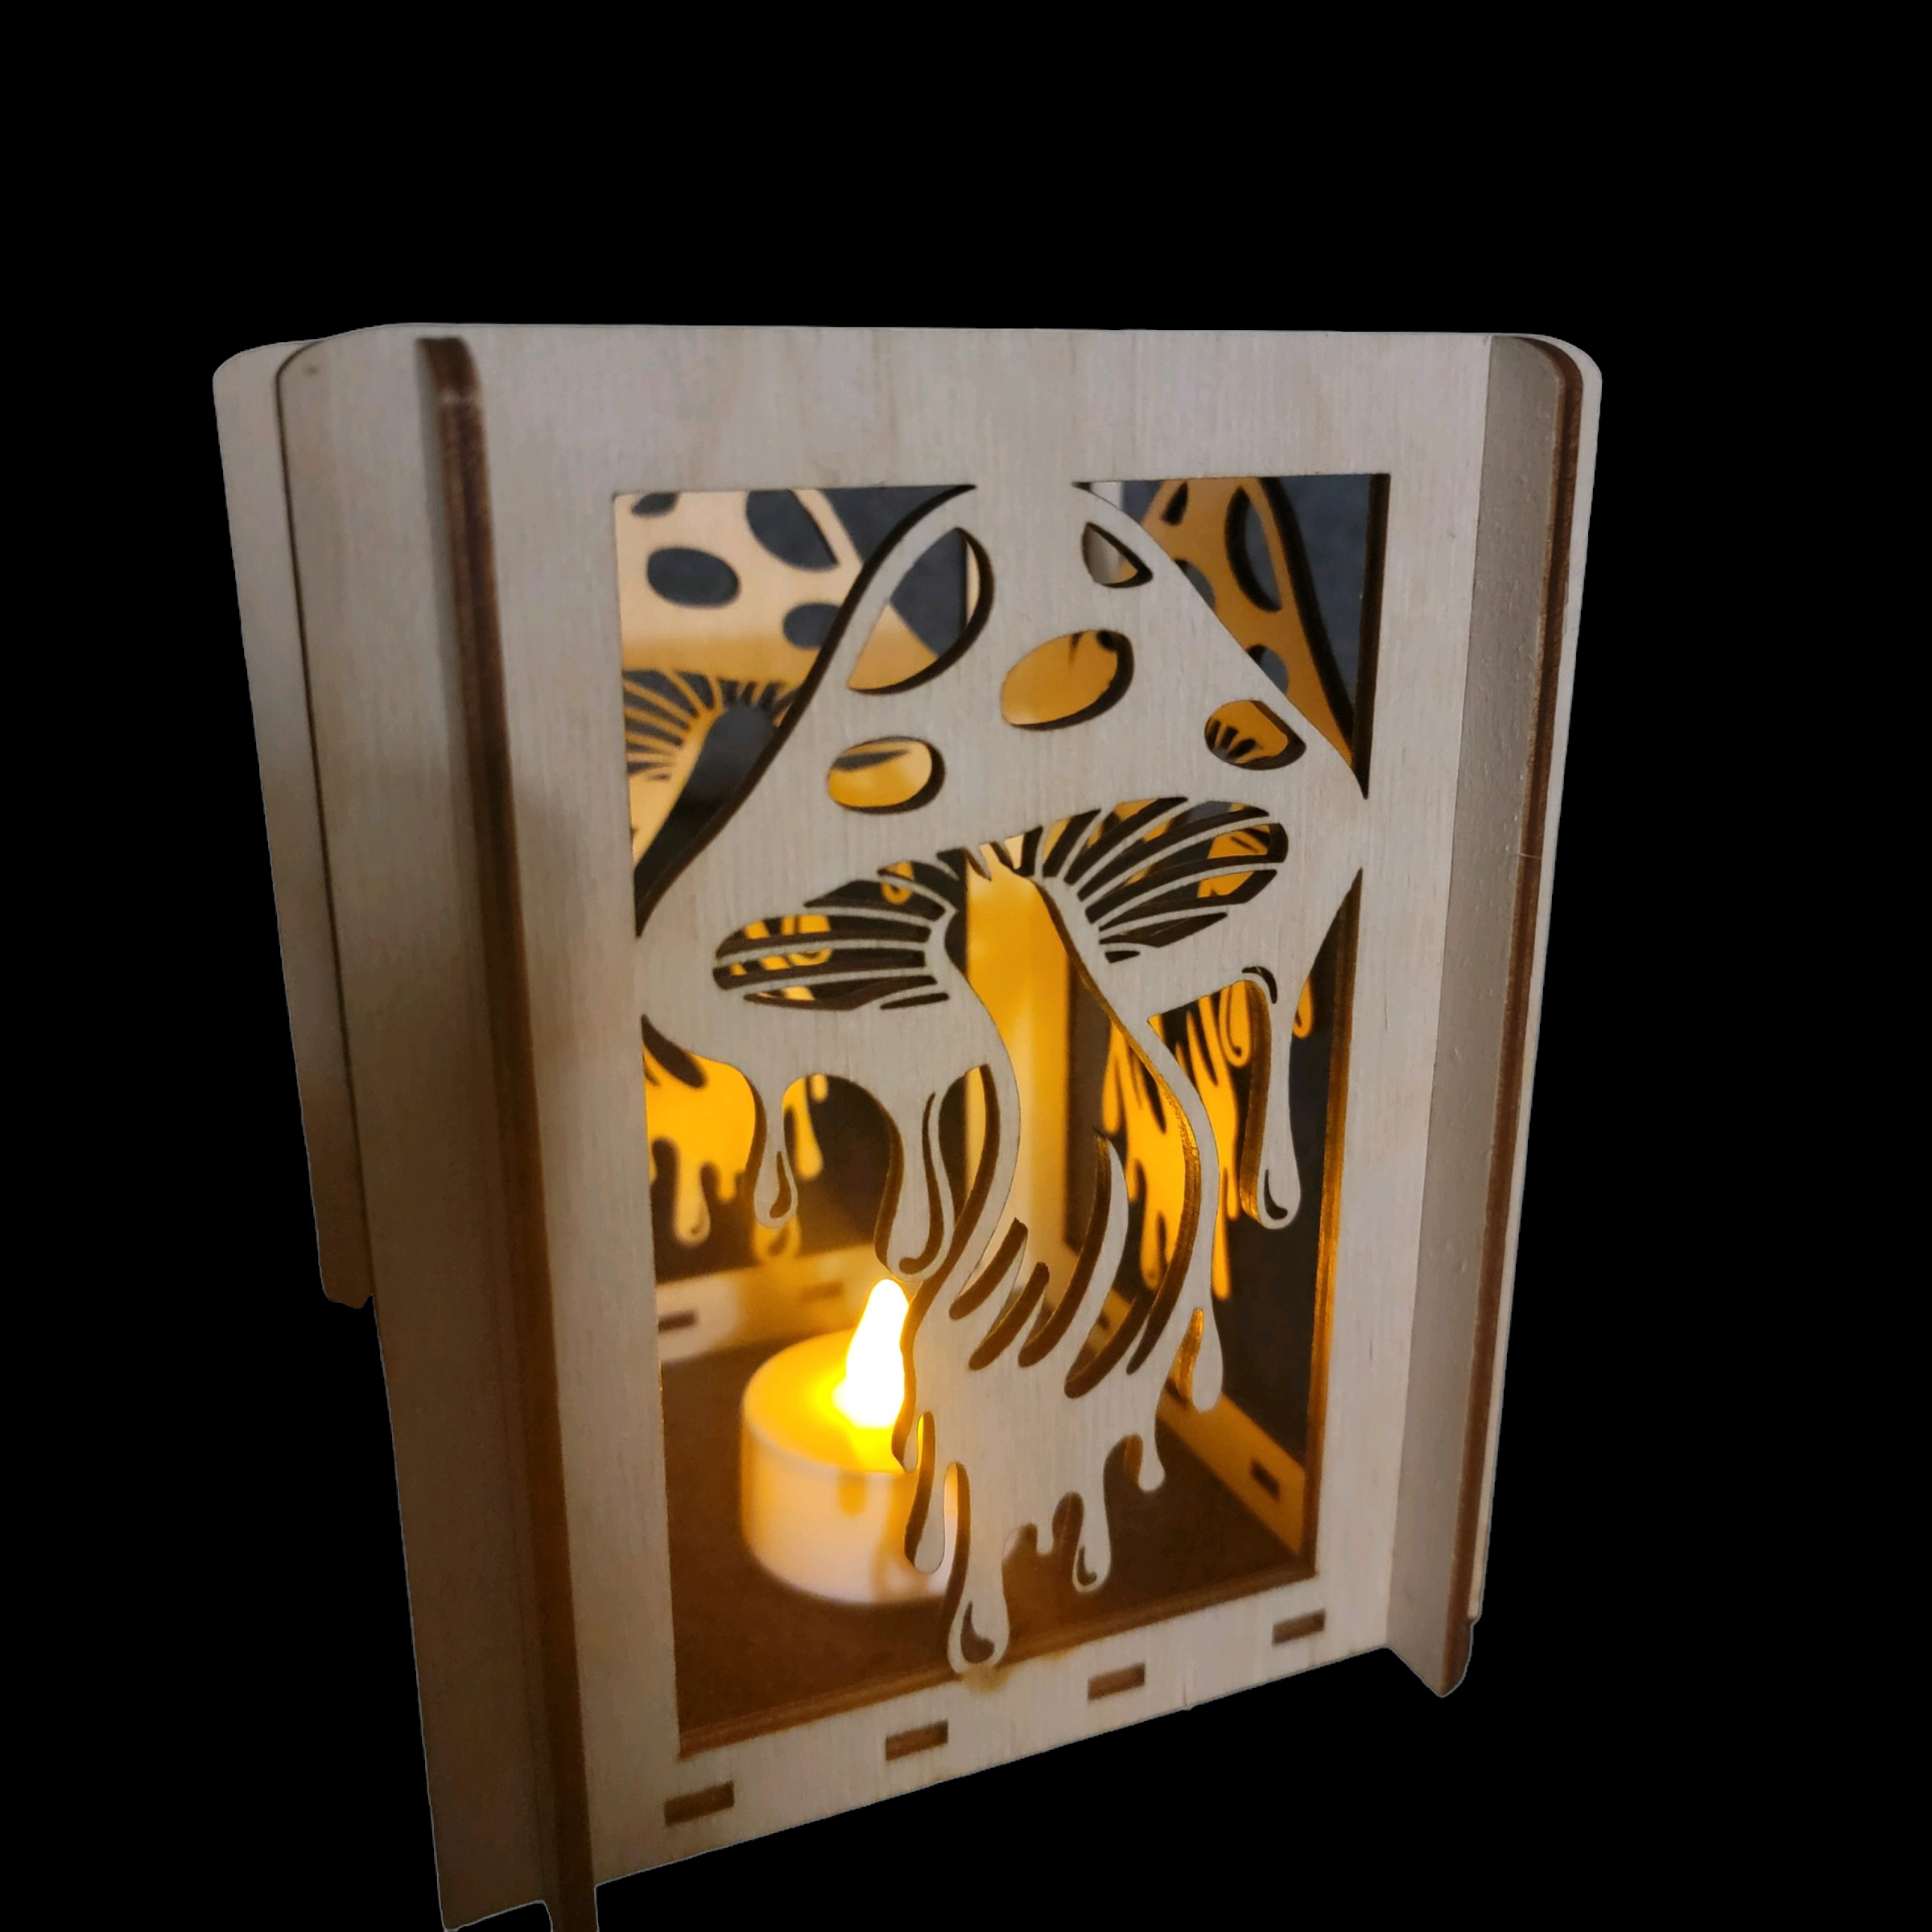 Lantern/Shadow Boxes - Made exclusively by Uniquely Bleau